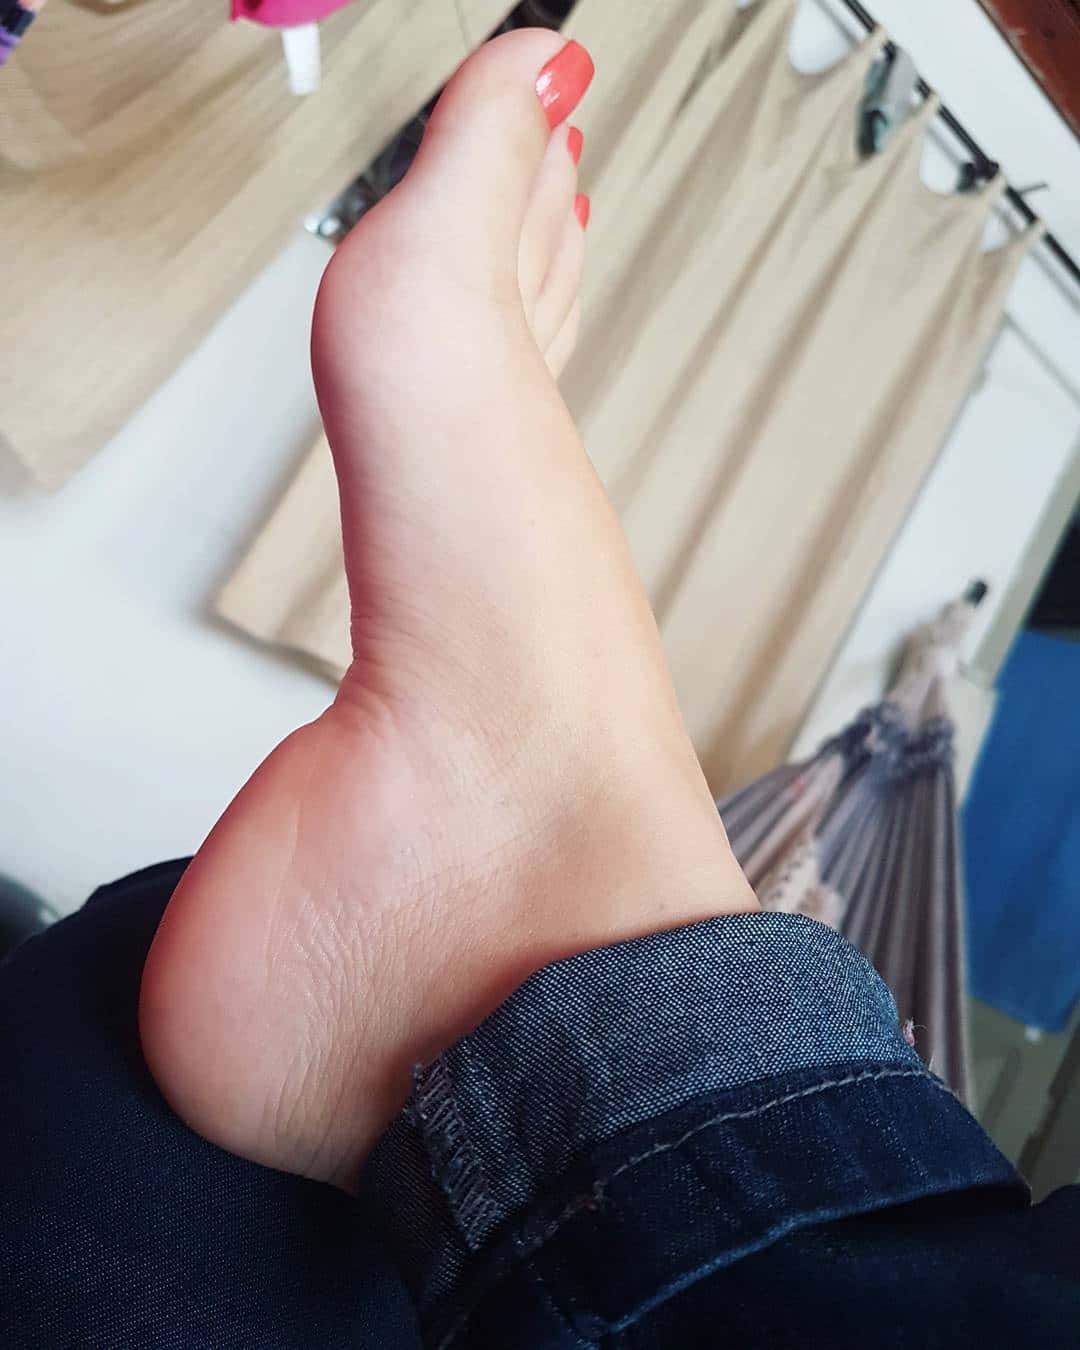 Foot Pictures